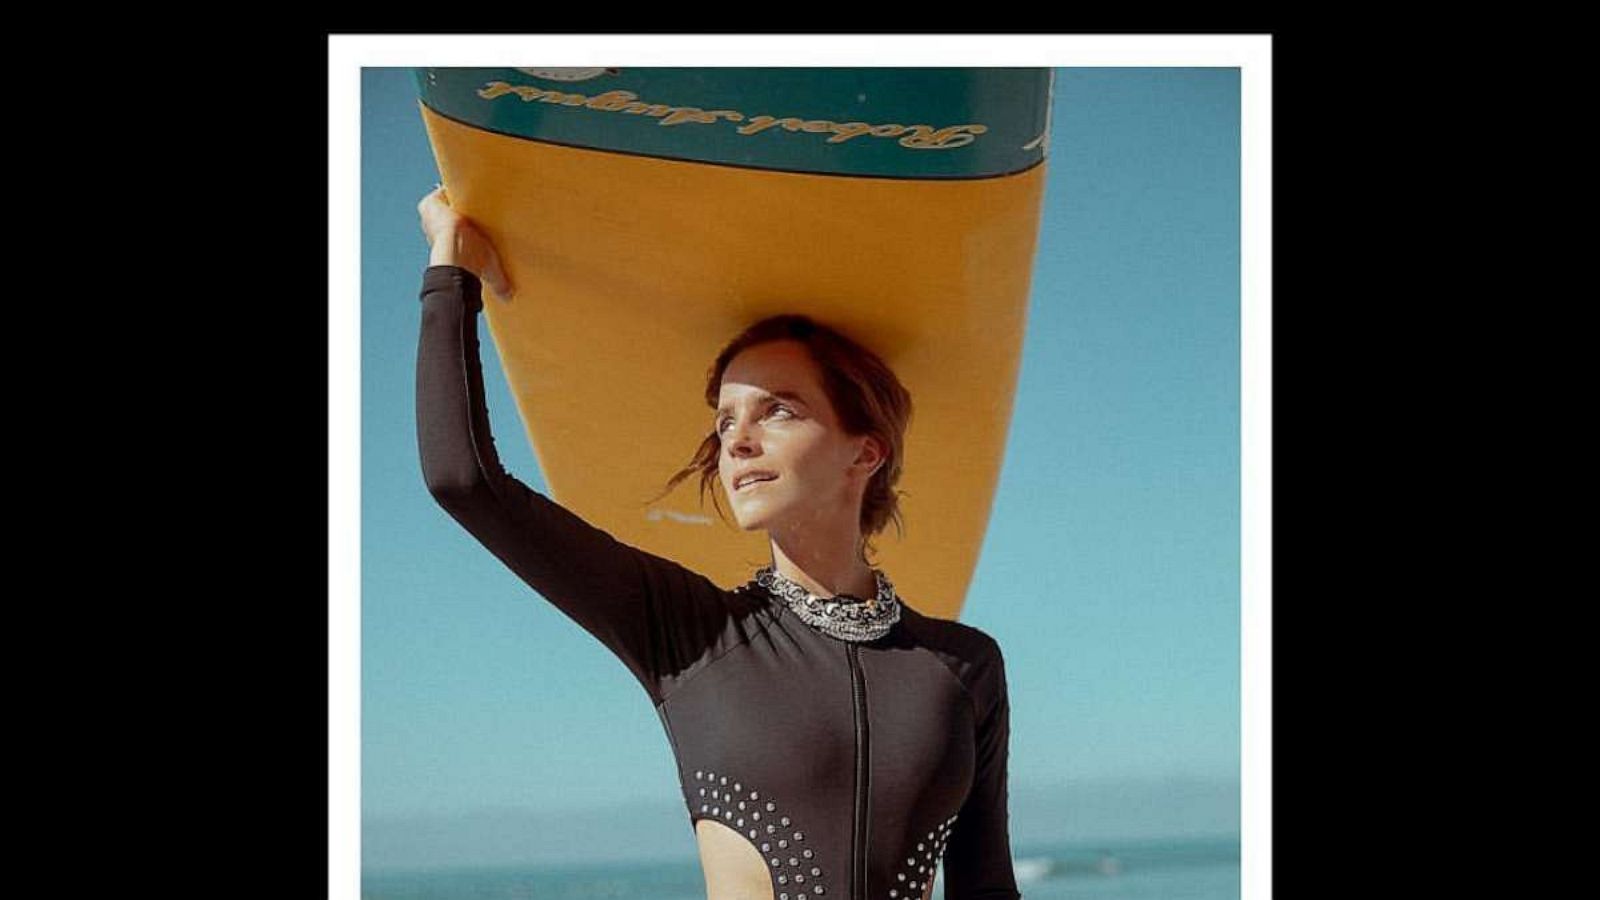 Emma Watson shows natural beauty as she surfs into summer in series of new  images - Good Morning America